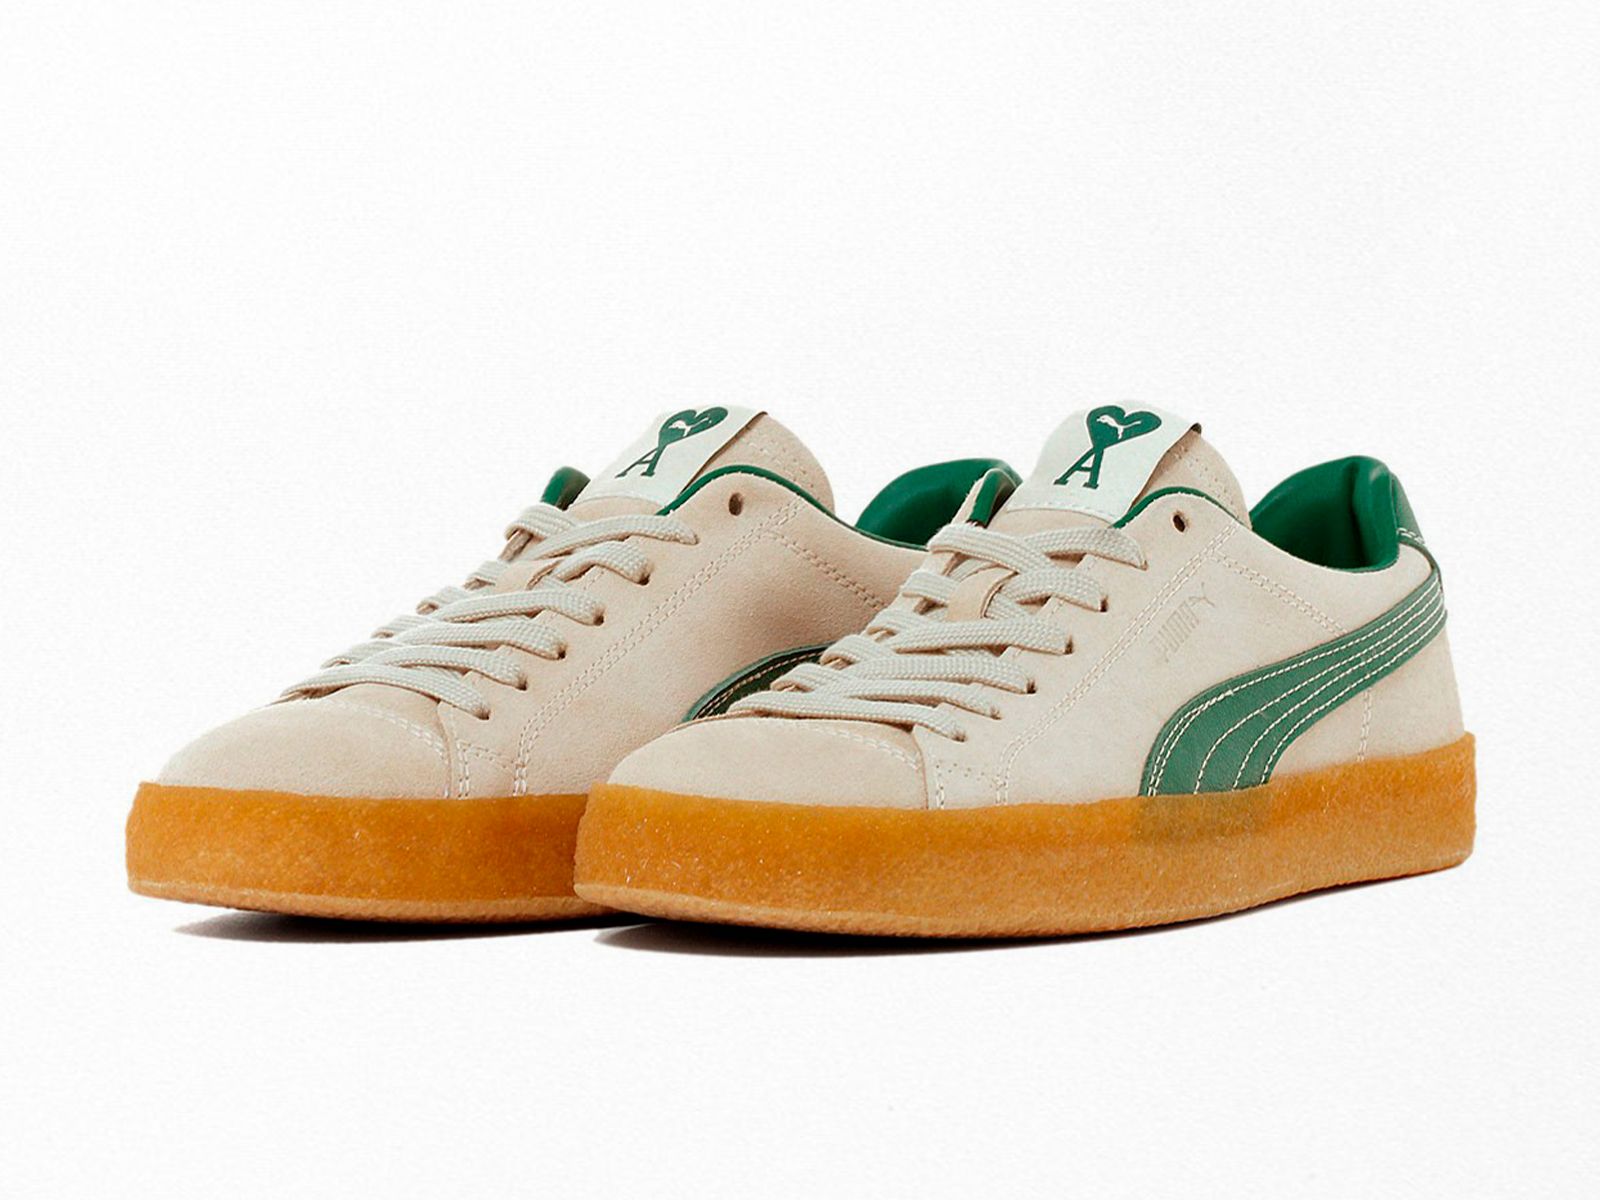 All the details about the AMI x Puma ‘Suede Crepe’